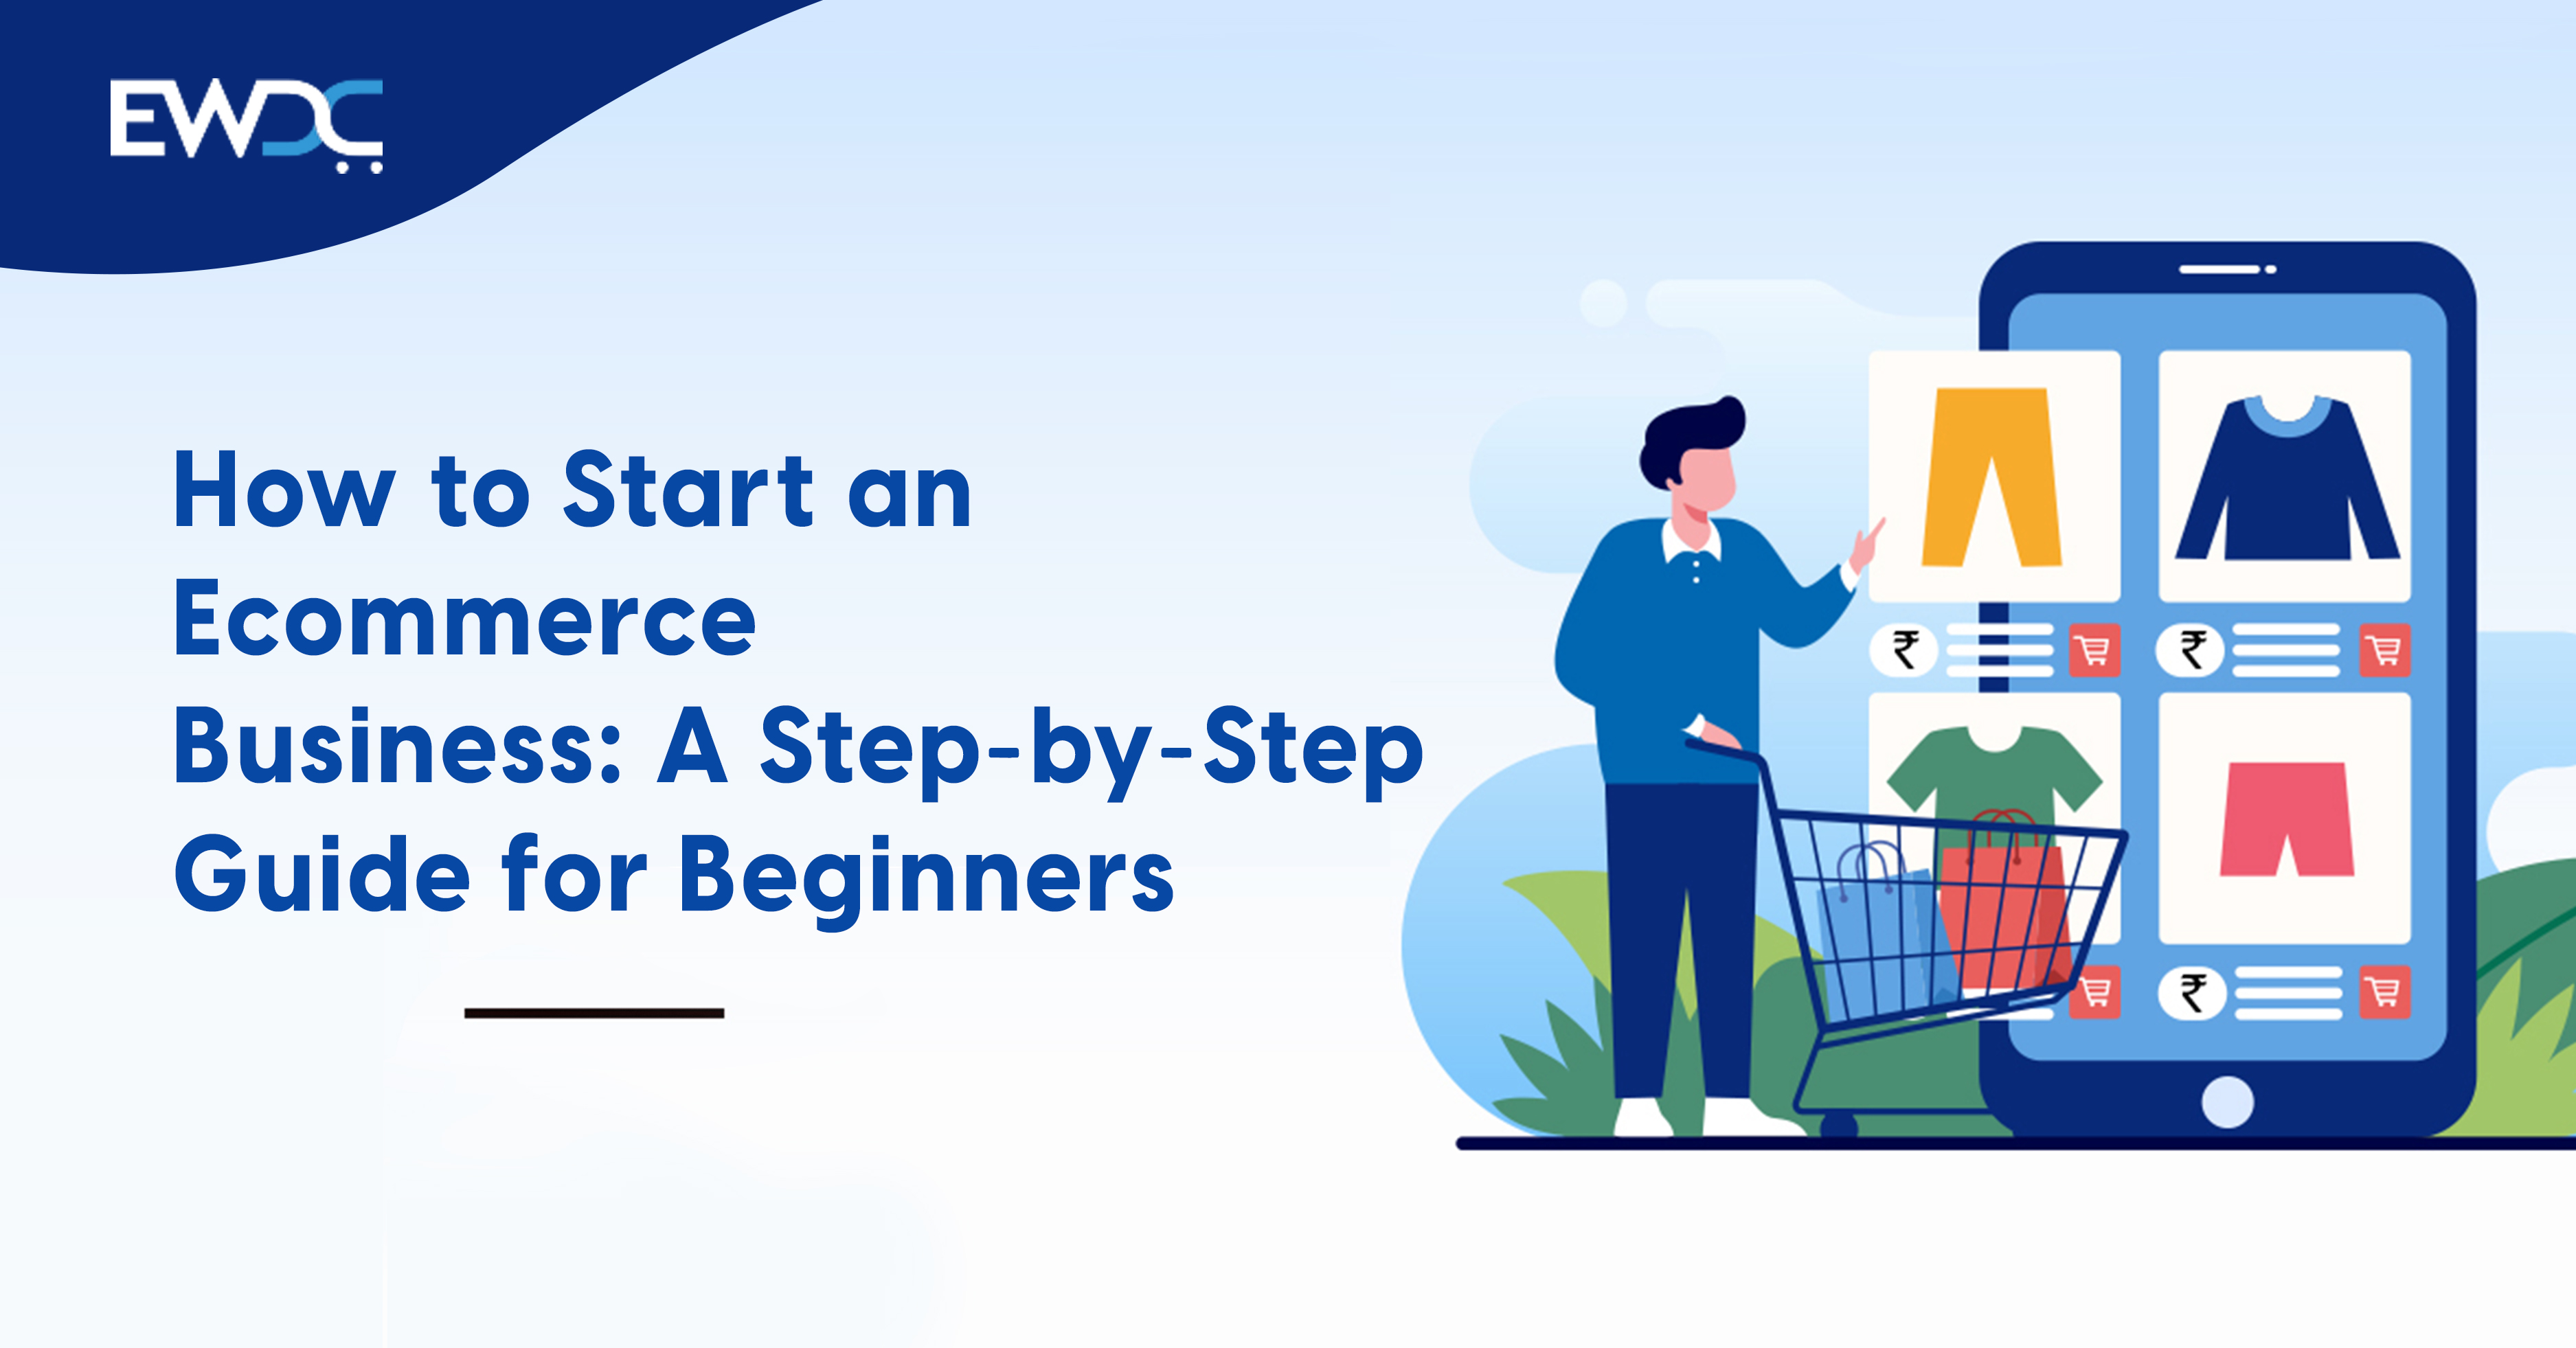 How to Start an Ecommerce Business: A Step-by-Step Guide for Beginners